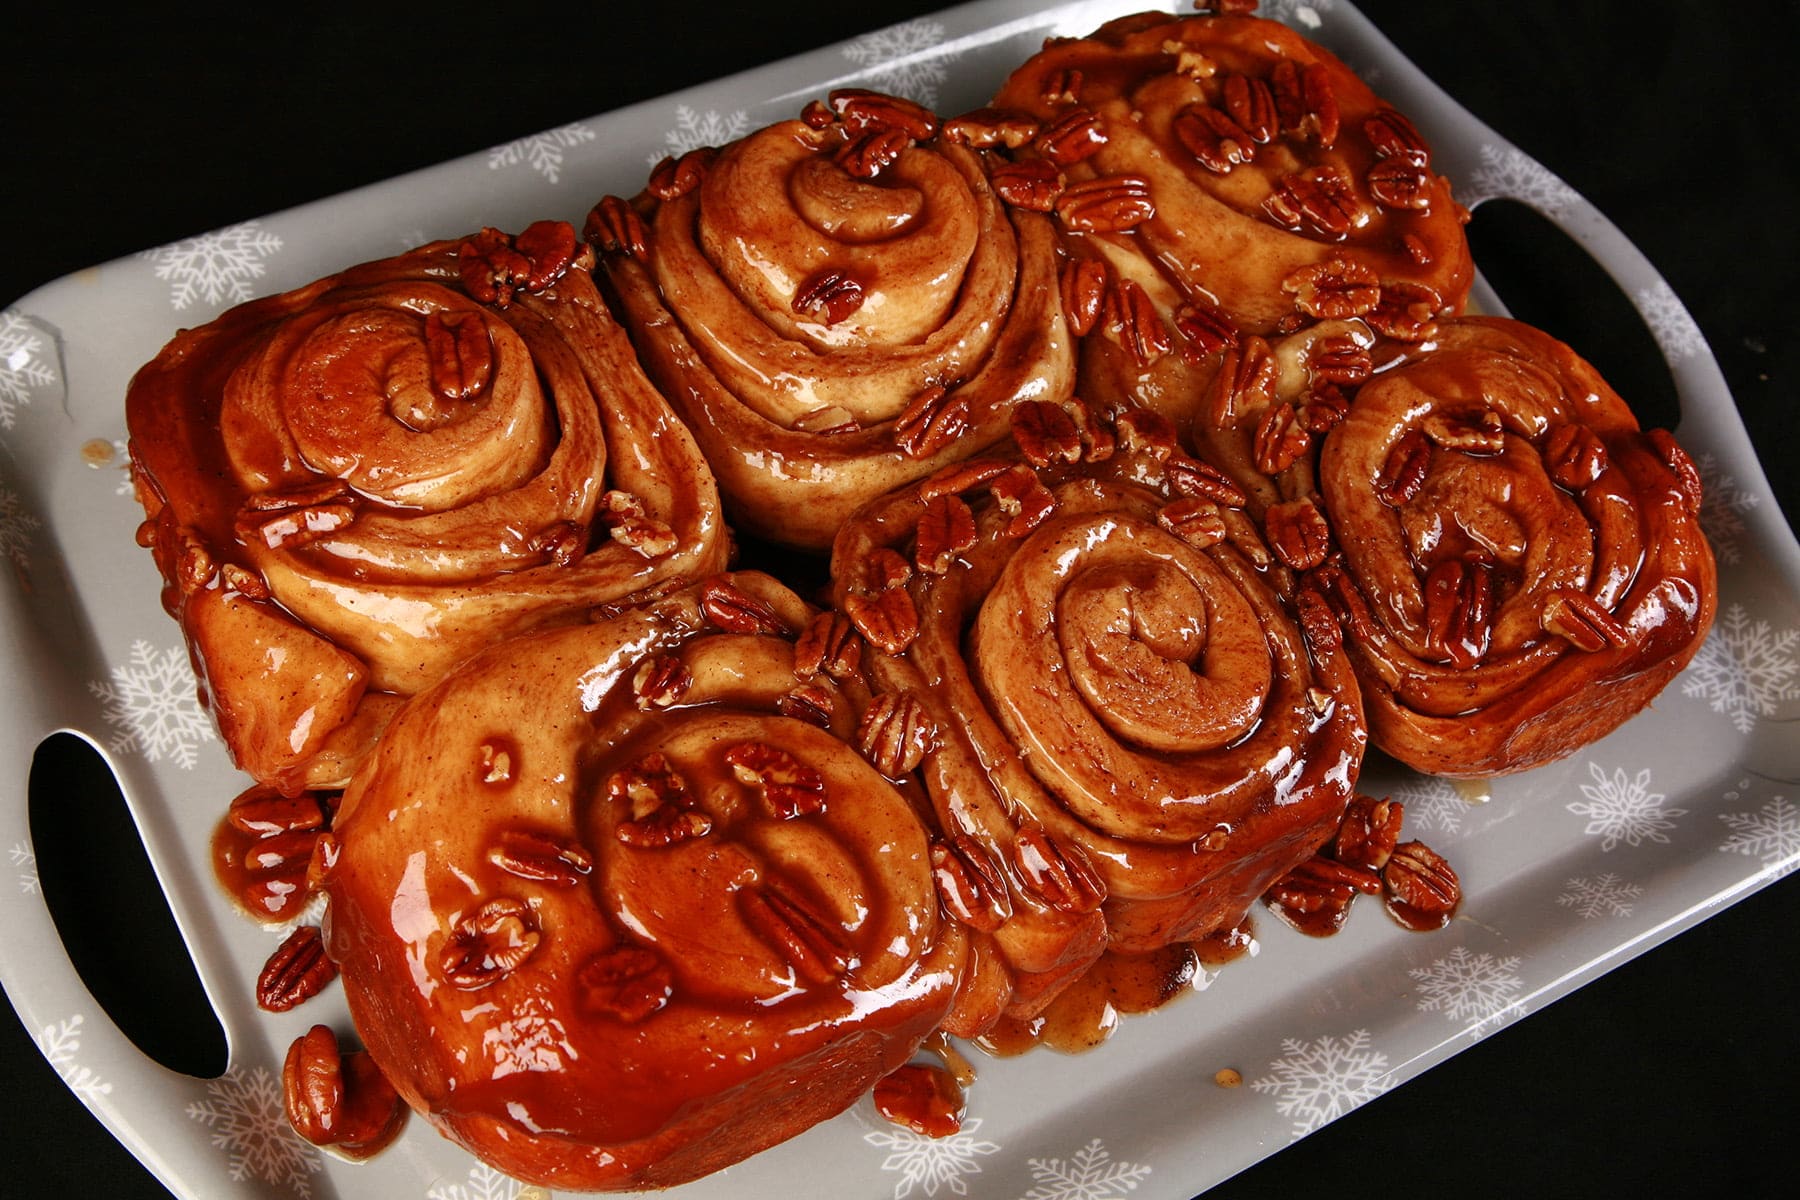 A close up view of a slab of 6 eggnog sticky buns. They are dripping with caramel and pecans.